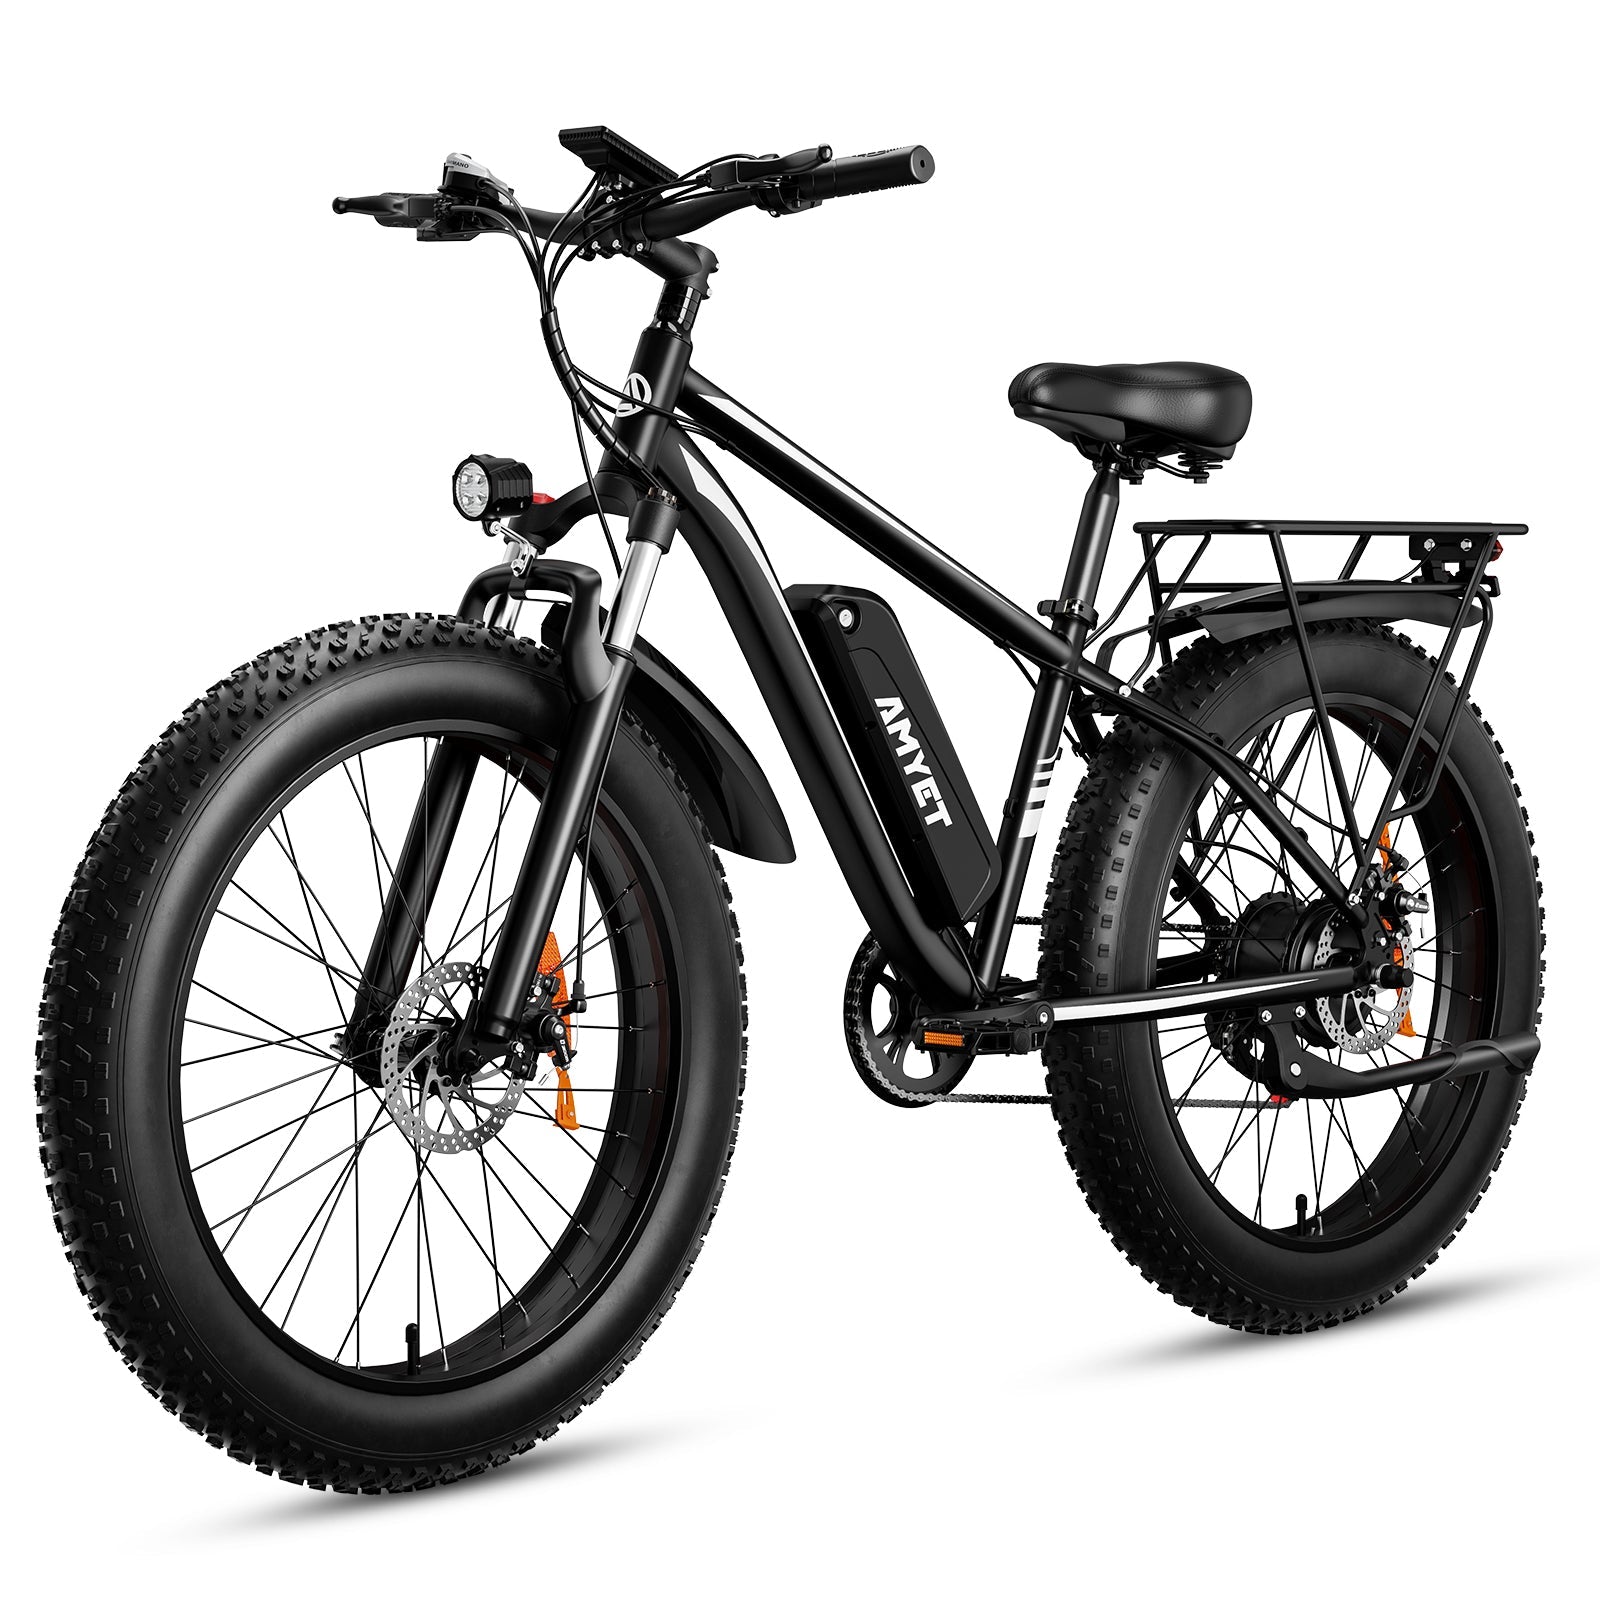 EB26 Iwheel Electric Bike with 1000W Motor and 26inch Tires.